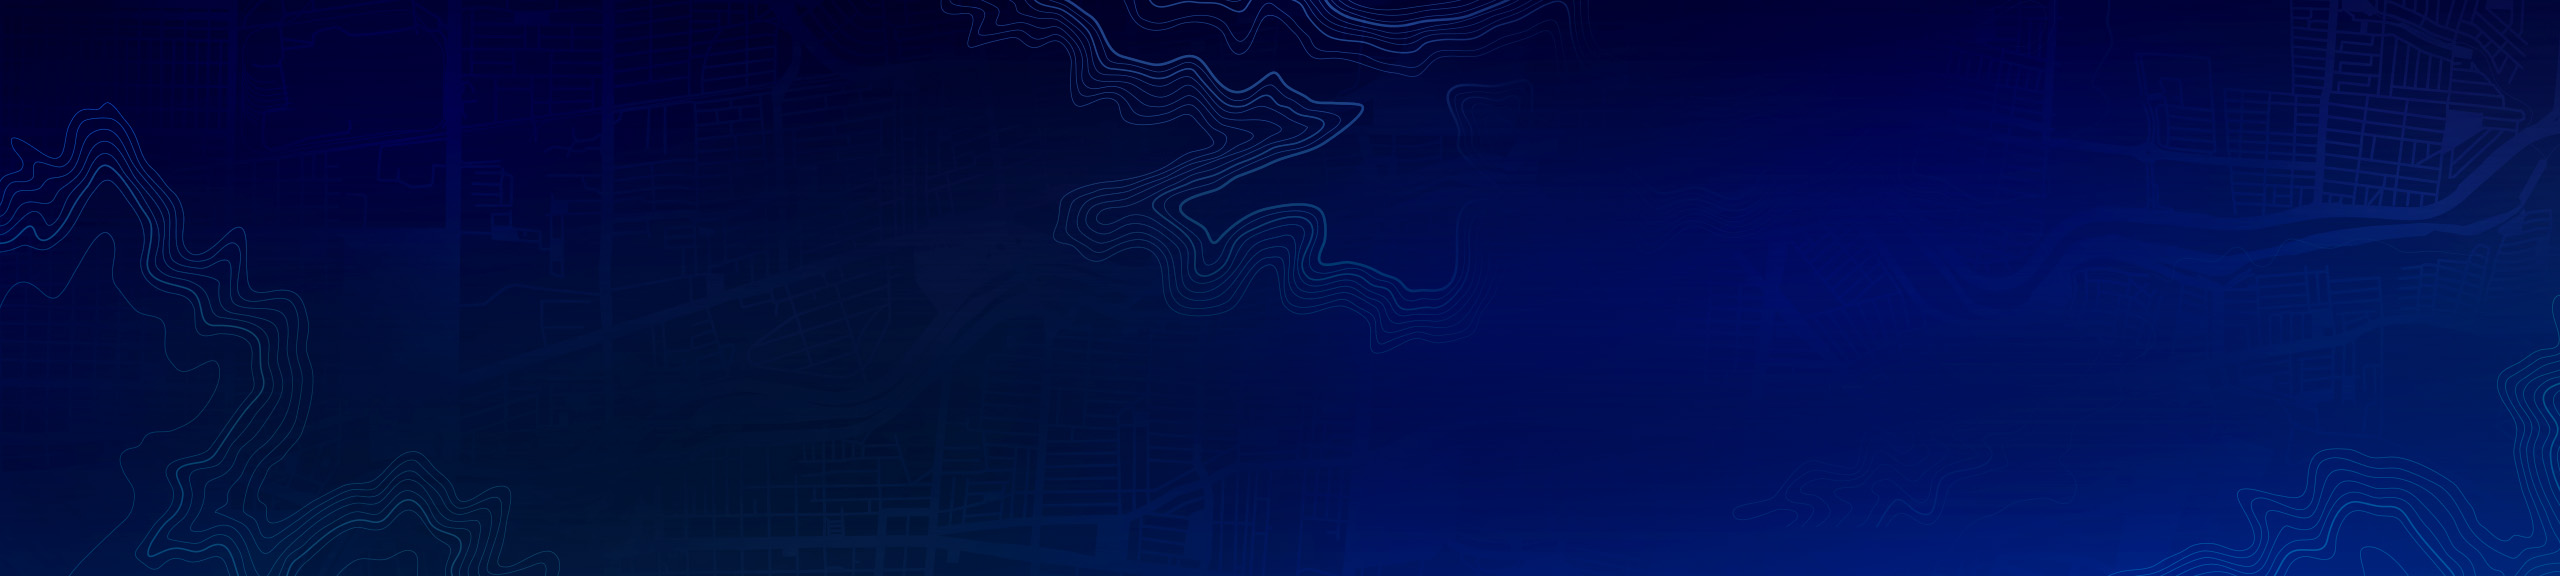 navy blue topography background